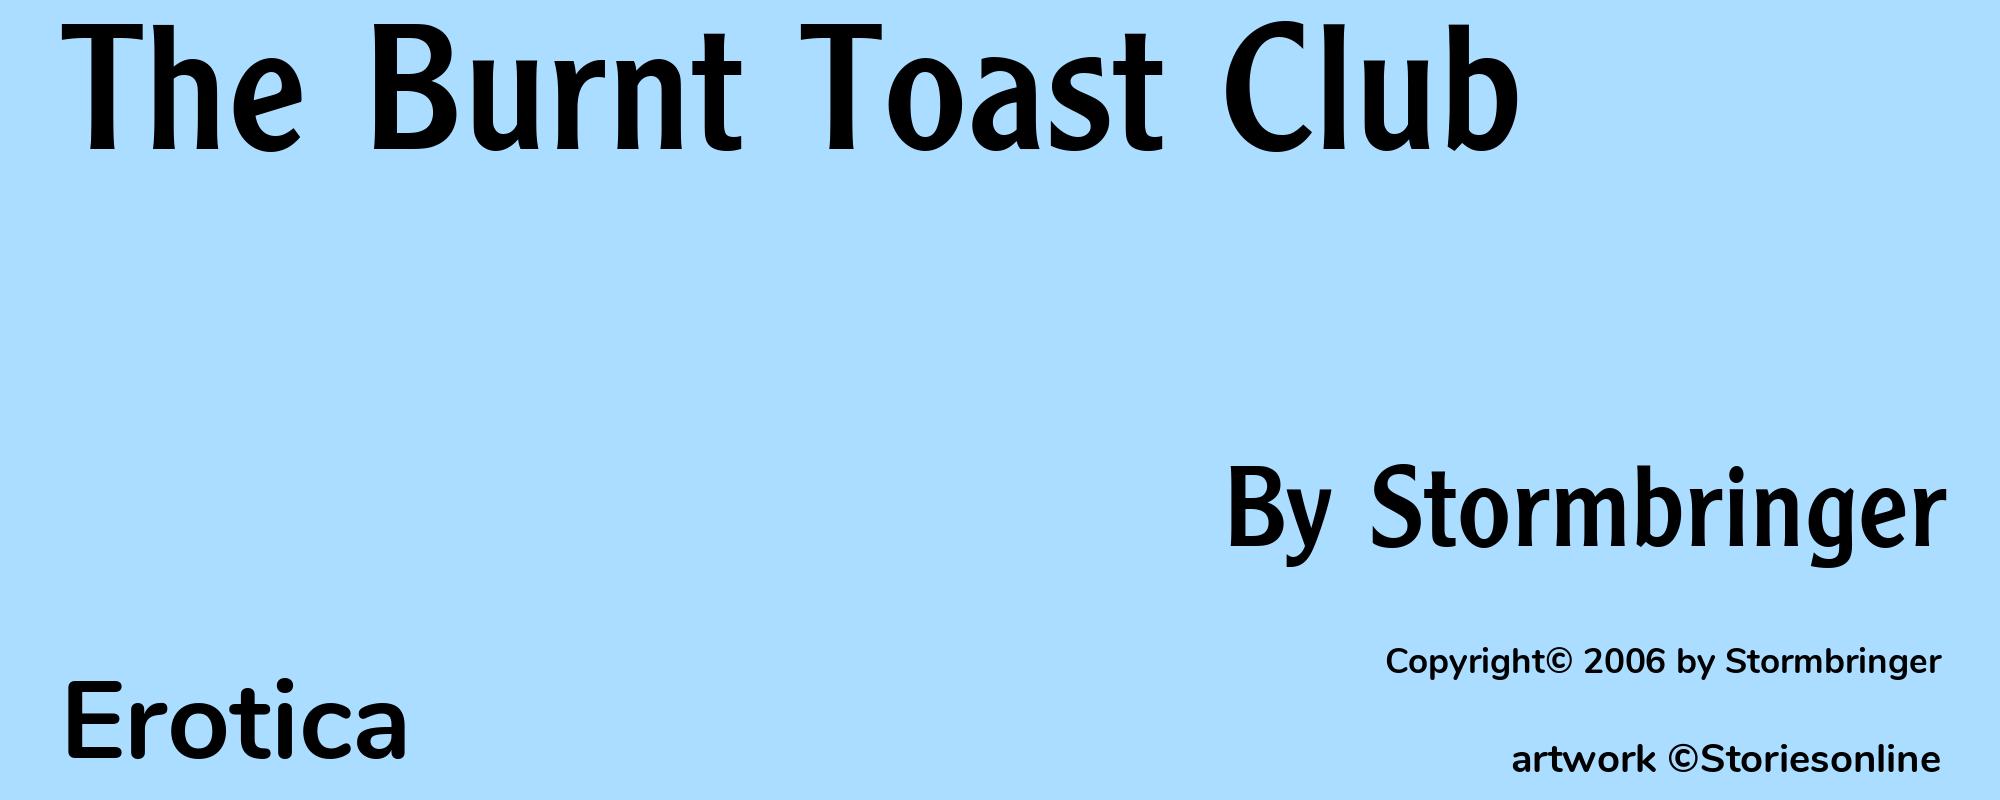 The Burnt Toast Club - Cover